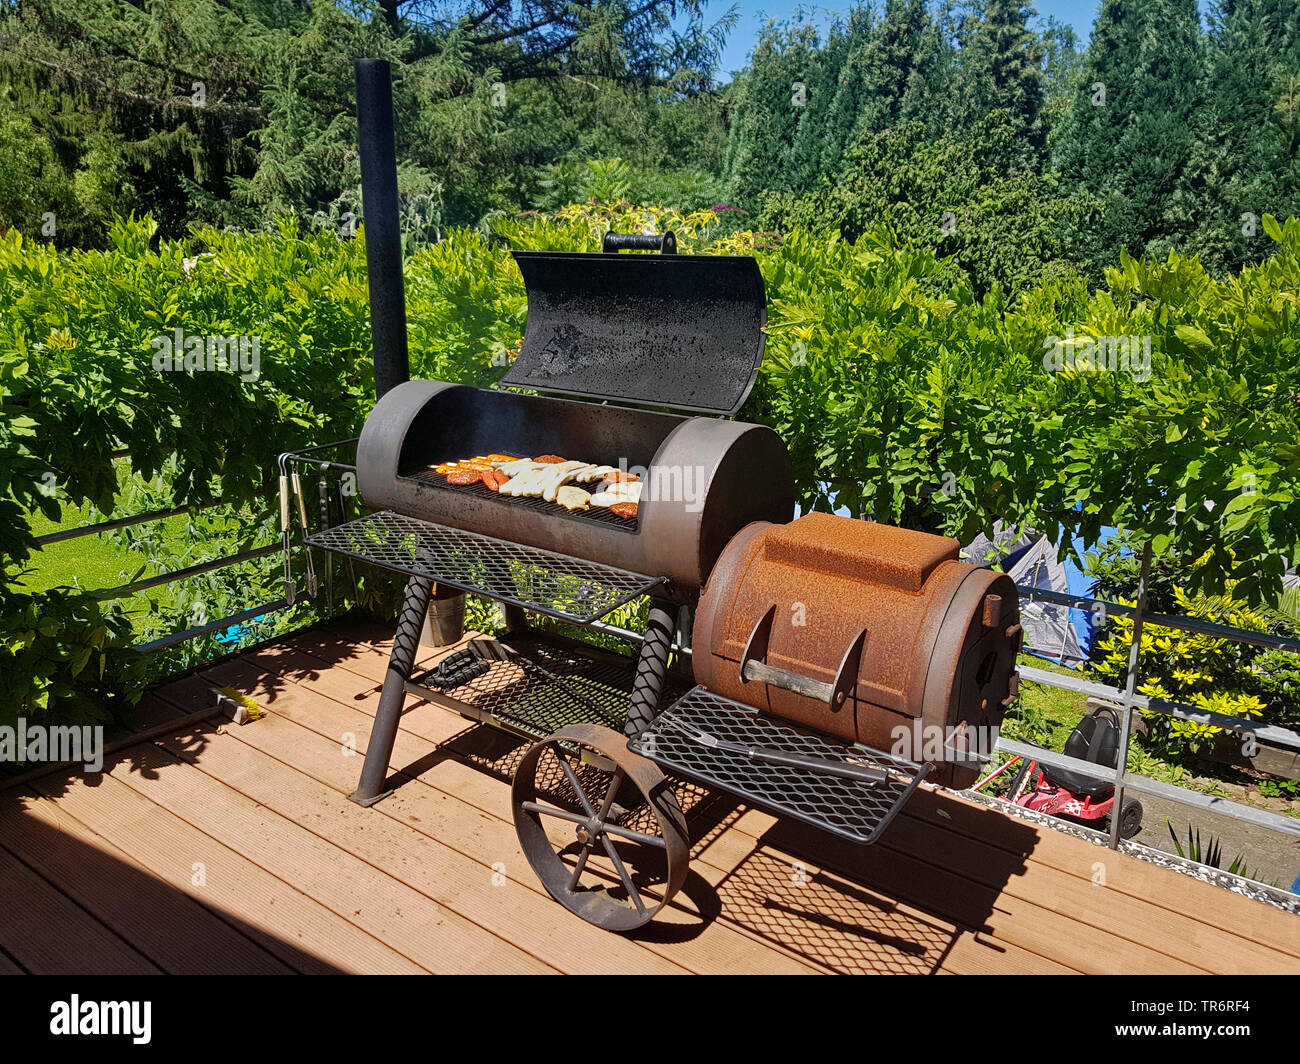 grill meat in a Barbecue-Smoker on a terrace, Germany Stock Photo